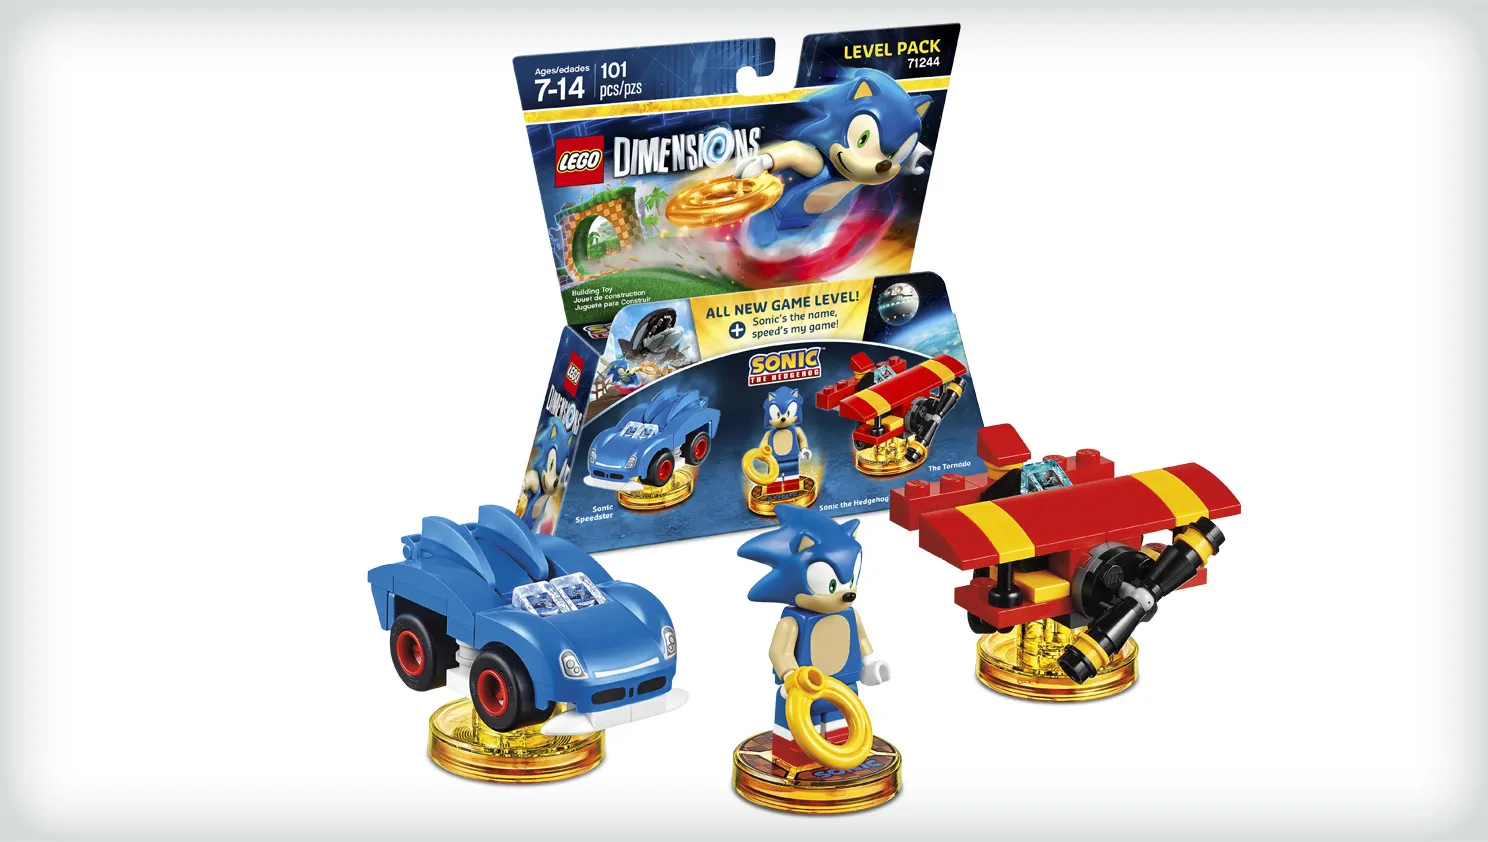 Sonic The Hedgehog Coming To LEGO Dimensions?